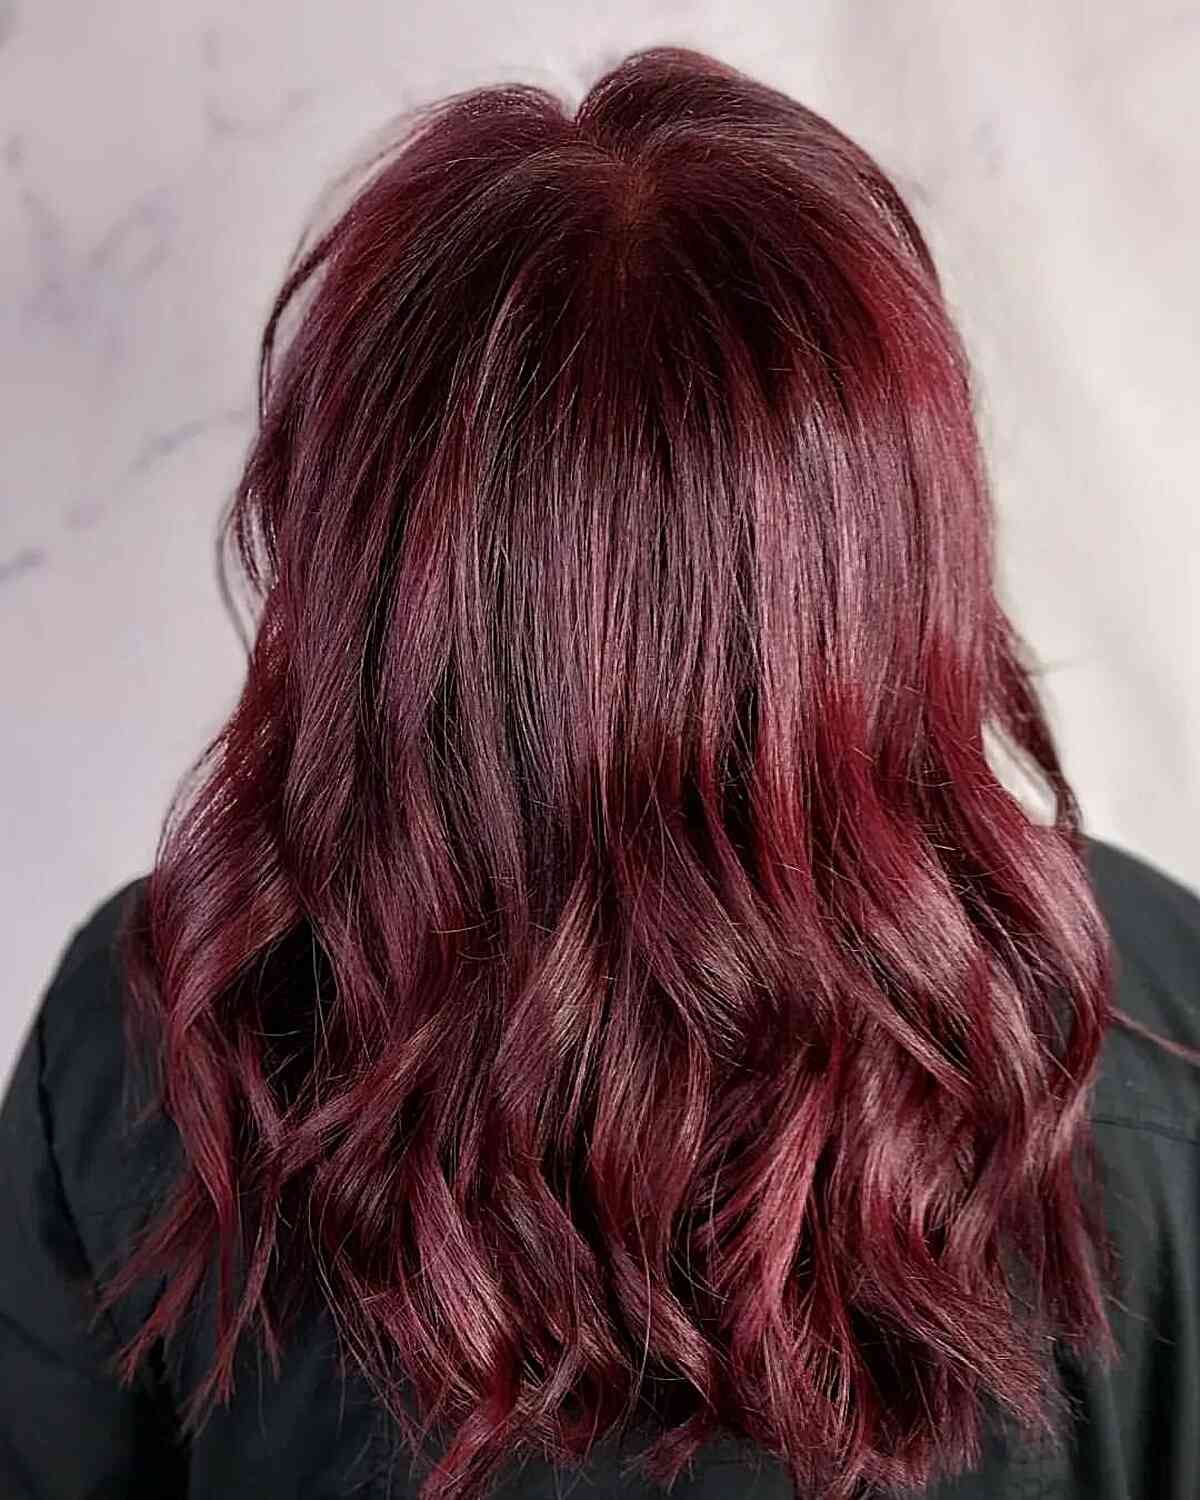 Burgundy Mulled Wine Hair Color with Medium-Length Layered Cut